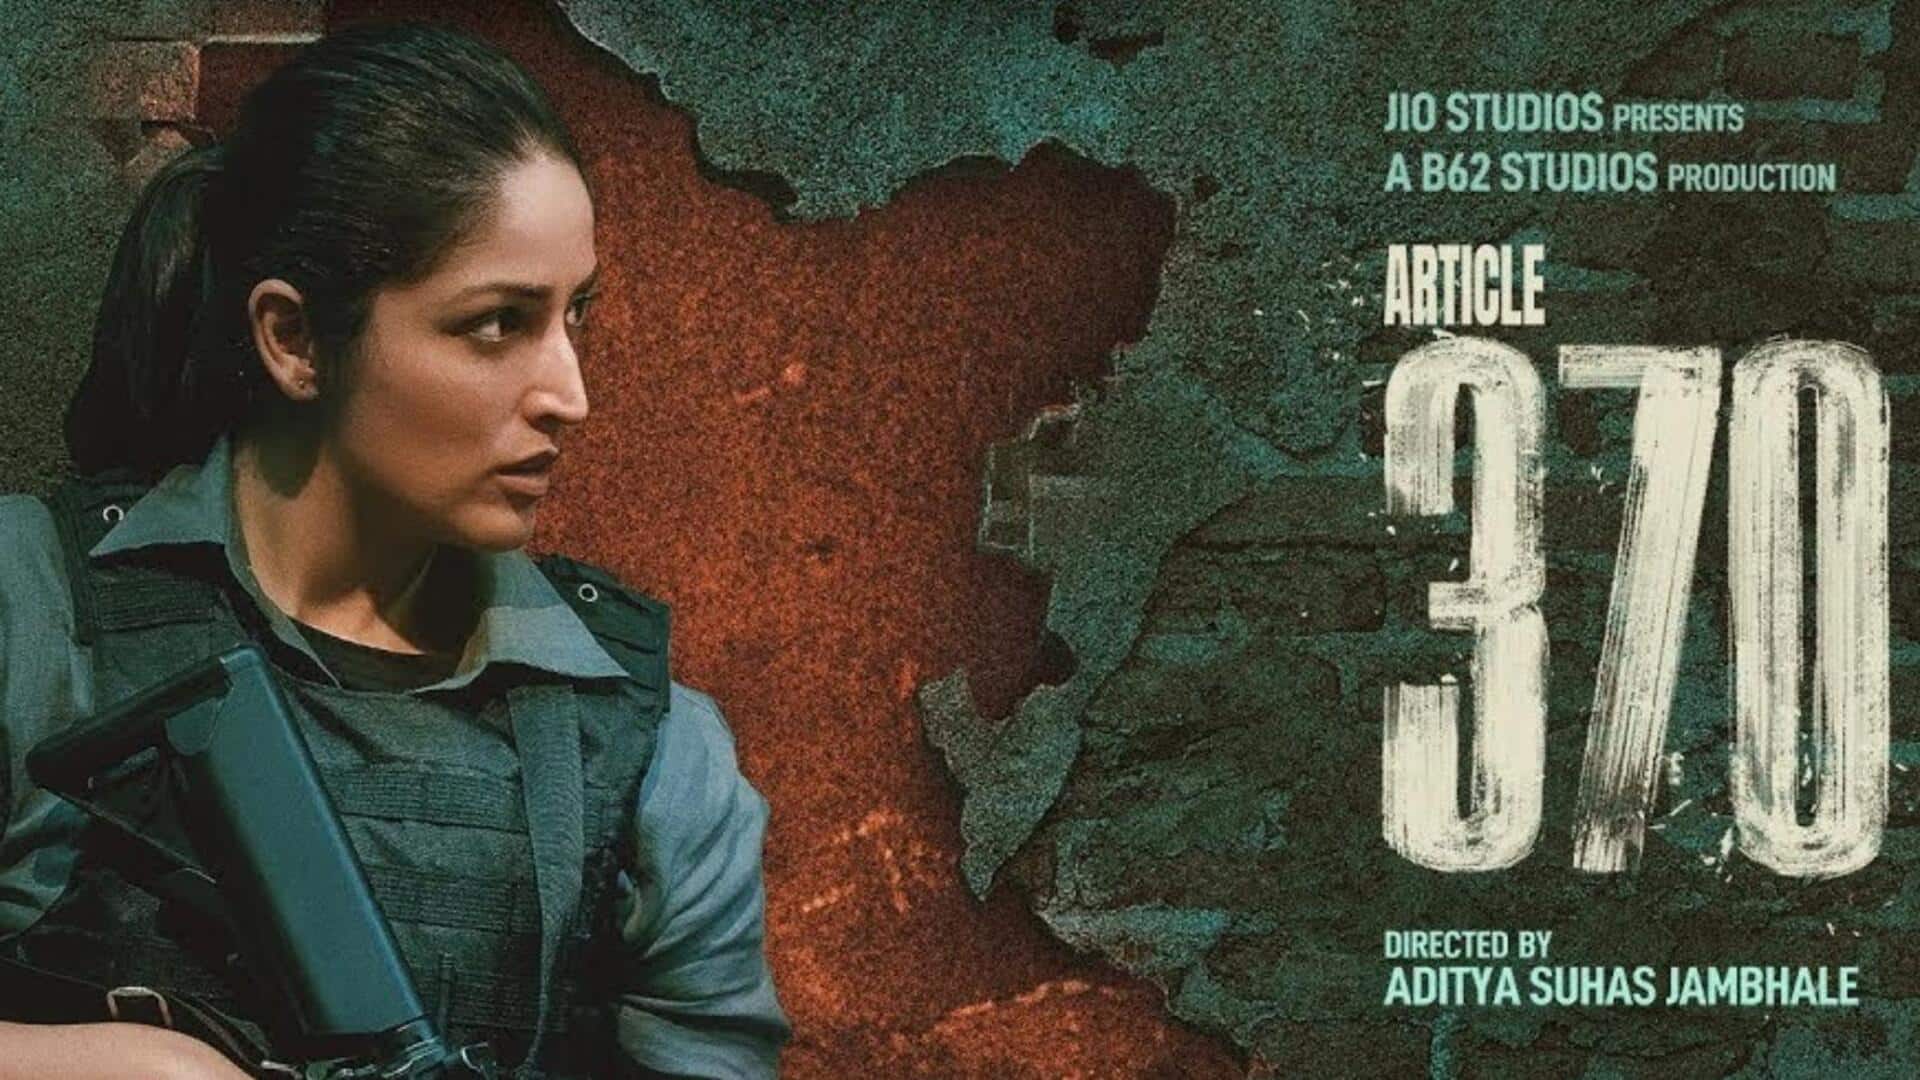 Box office collection: 'Article 370' stays strong over second weekend